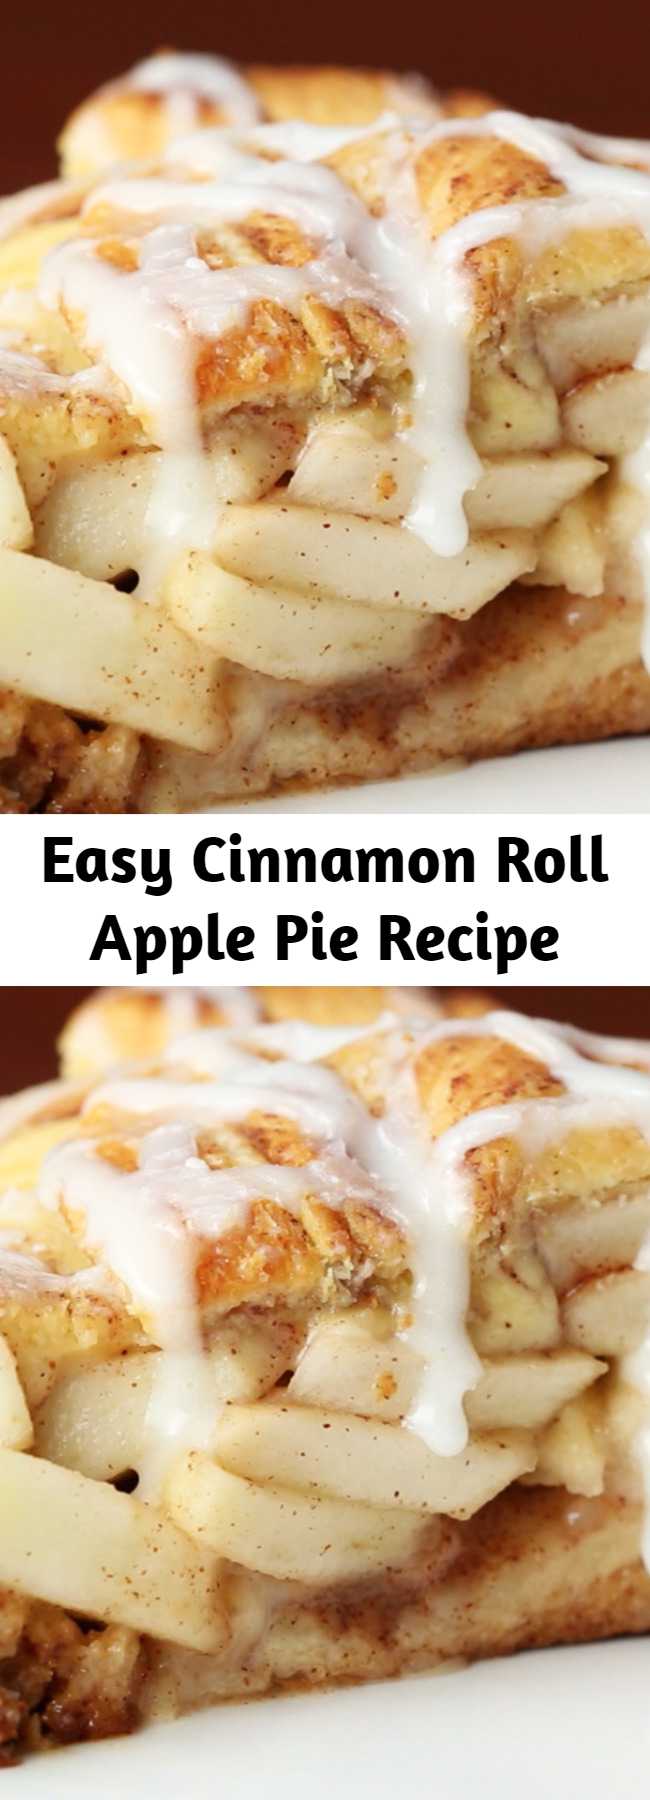 Easy Cinnamon Roll Apple Pie Recipe - Cinnamon rolls and apple pie all in one? It's almost too good to be true! This amazing dessert only has 5 ingredients and is perfect to make for Thanksgiving, a holiday party, or even just to enjoy the fall weather.